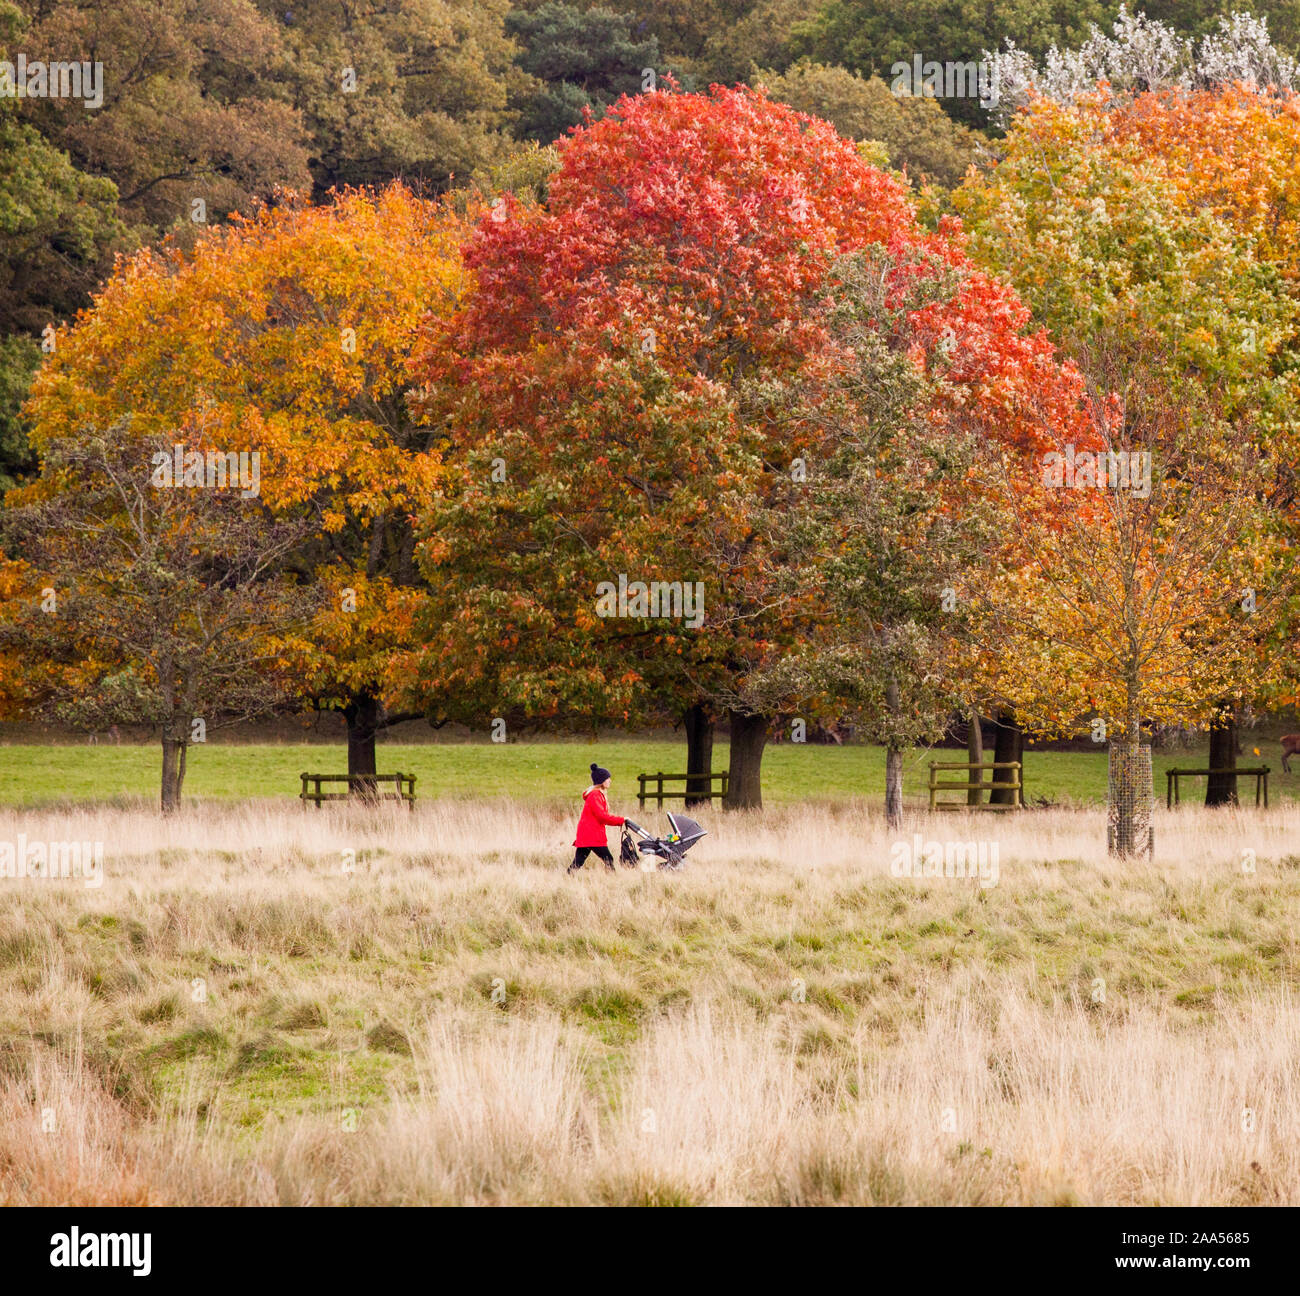 Woman in red coat and hat pushing pushchair enjoying a Autumn day out walking  in the National trust  Tatton Park parkland Knutsford Cheshire Stock Photo